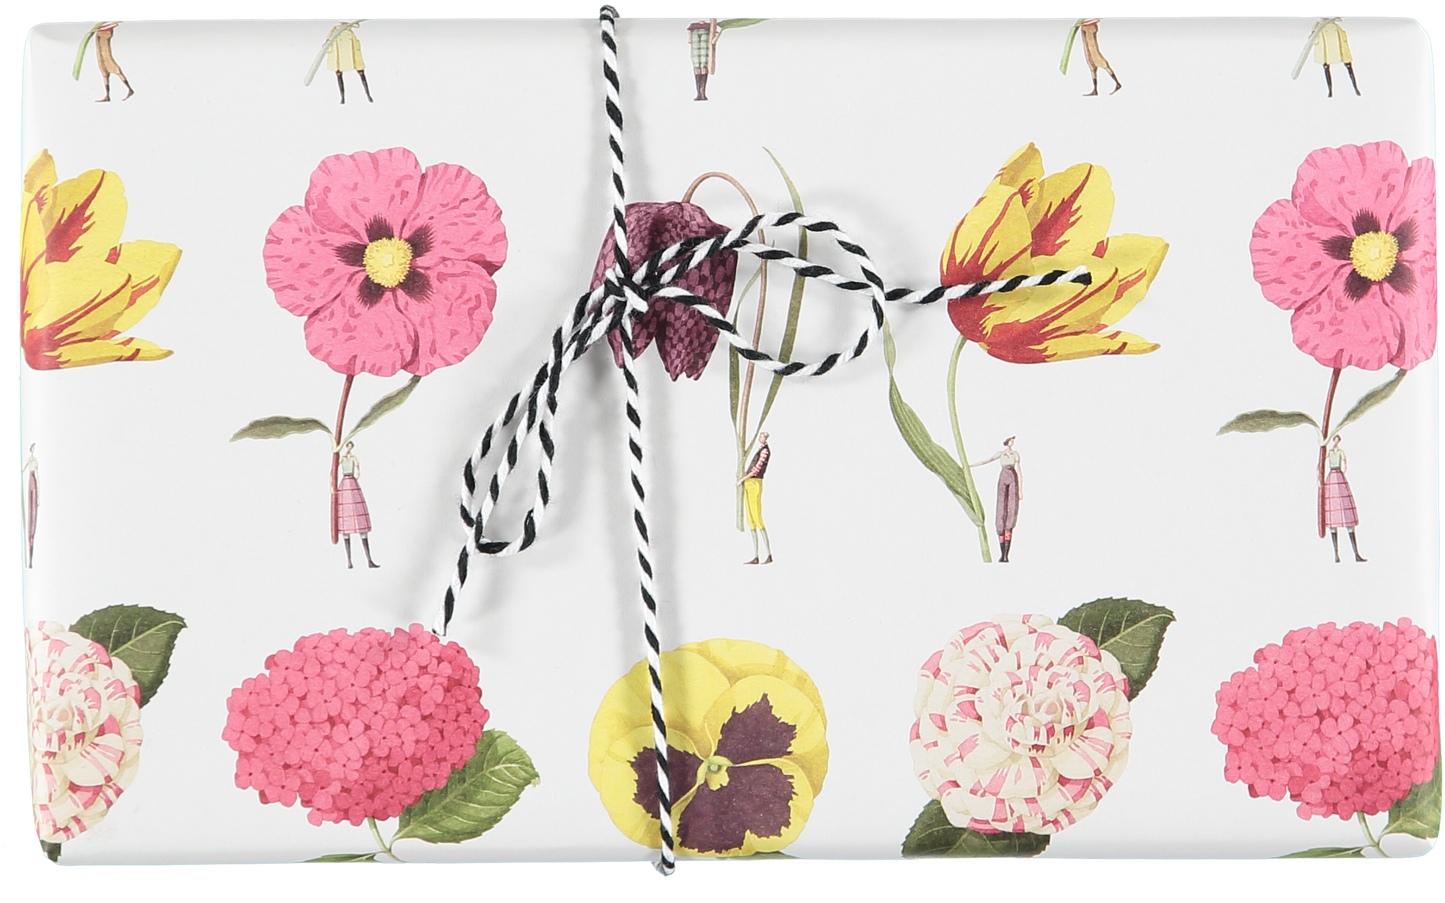 giftwrap, wrapping paper, fsc paper, made in england, illustration, flowers